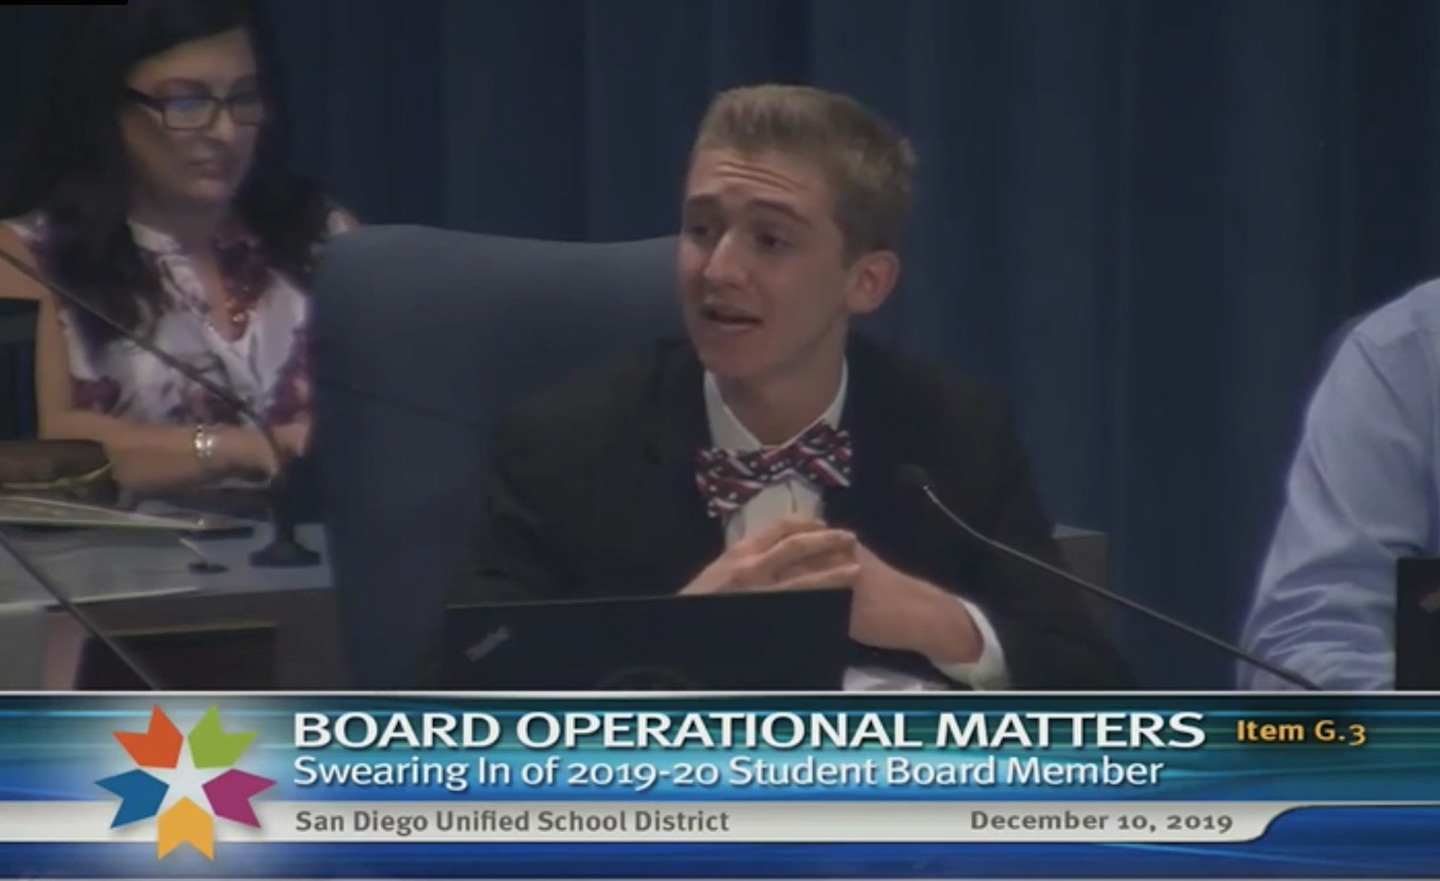 Zachary speaking at a San Diego school board meeting.